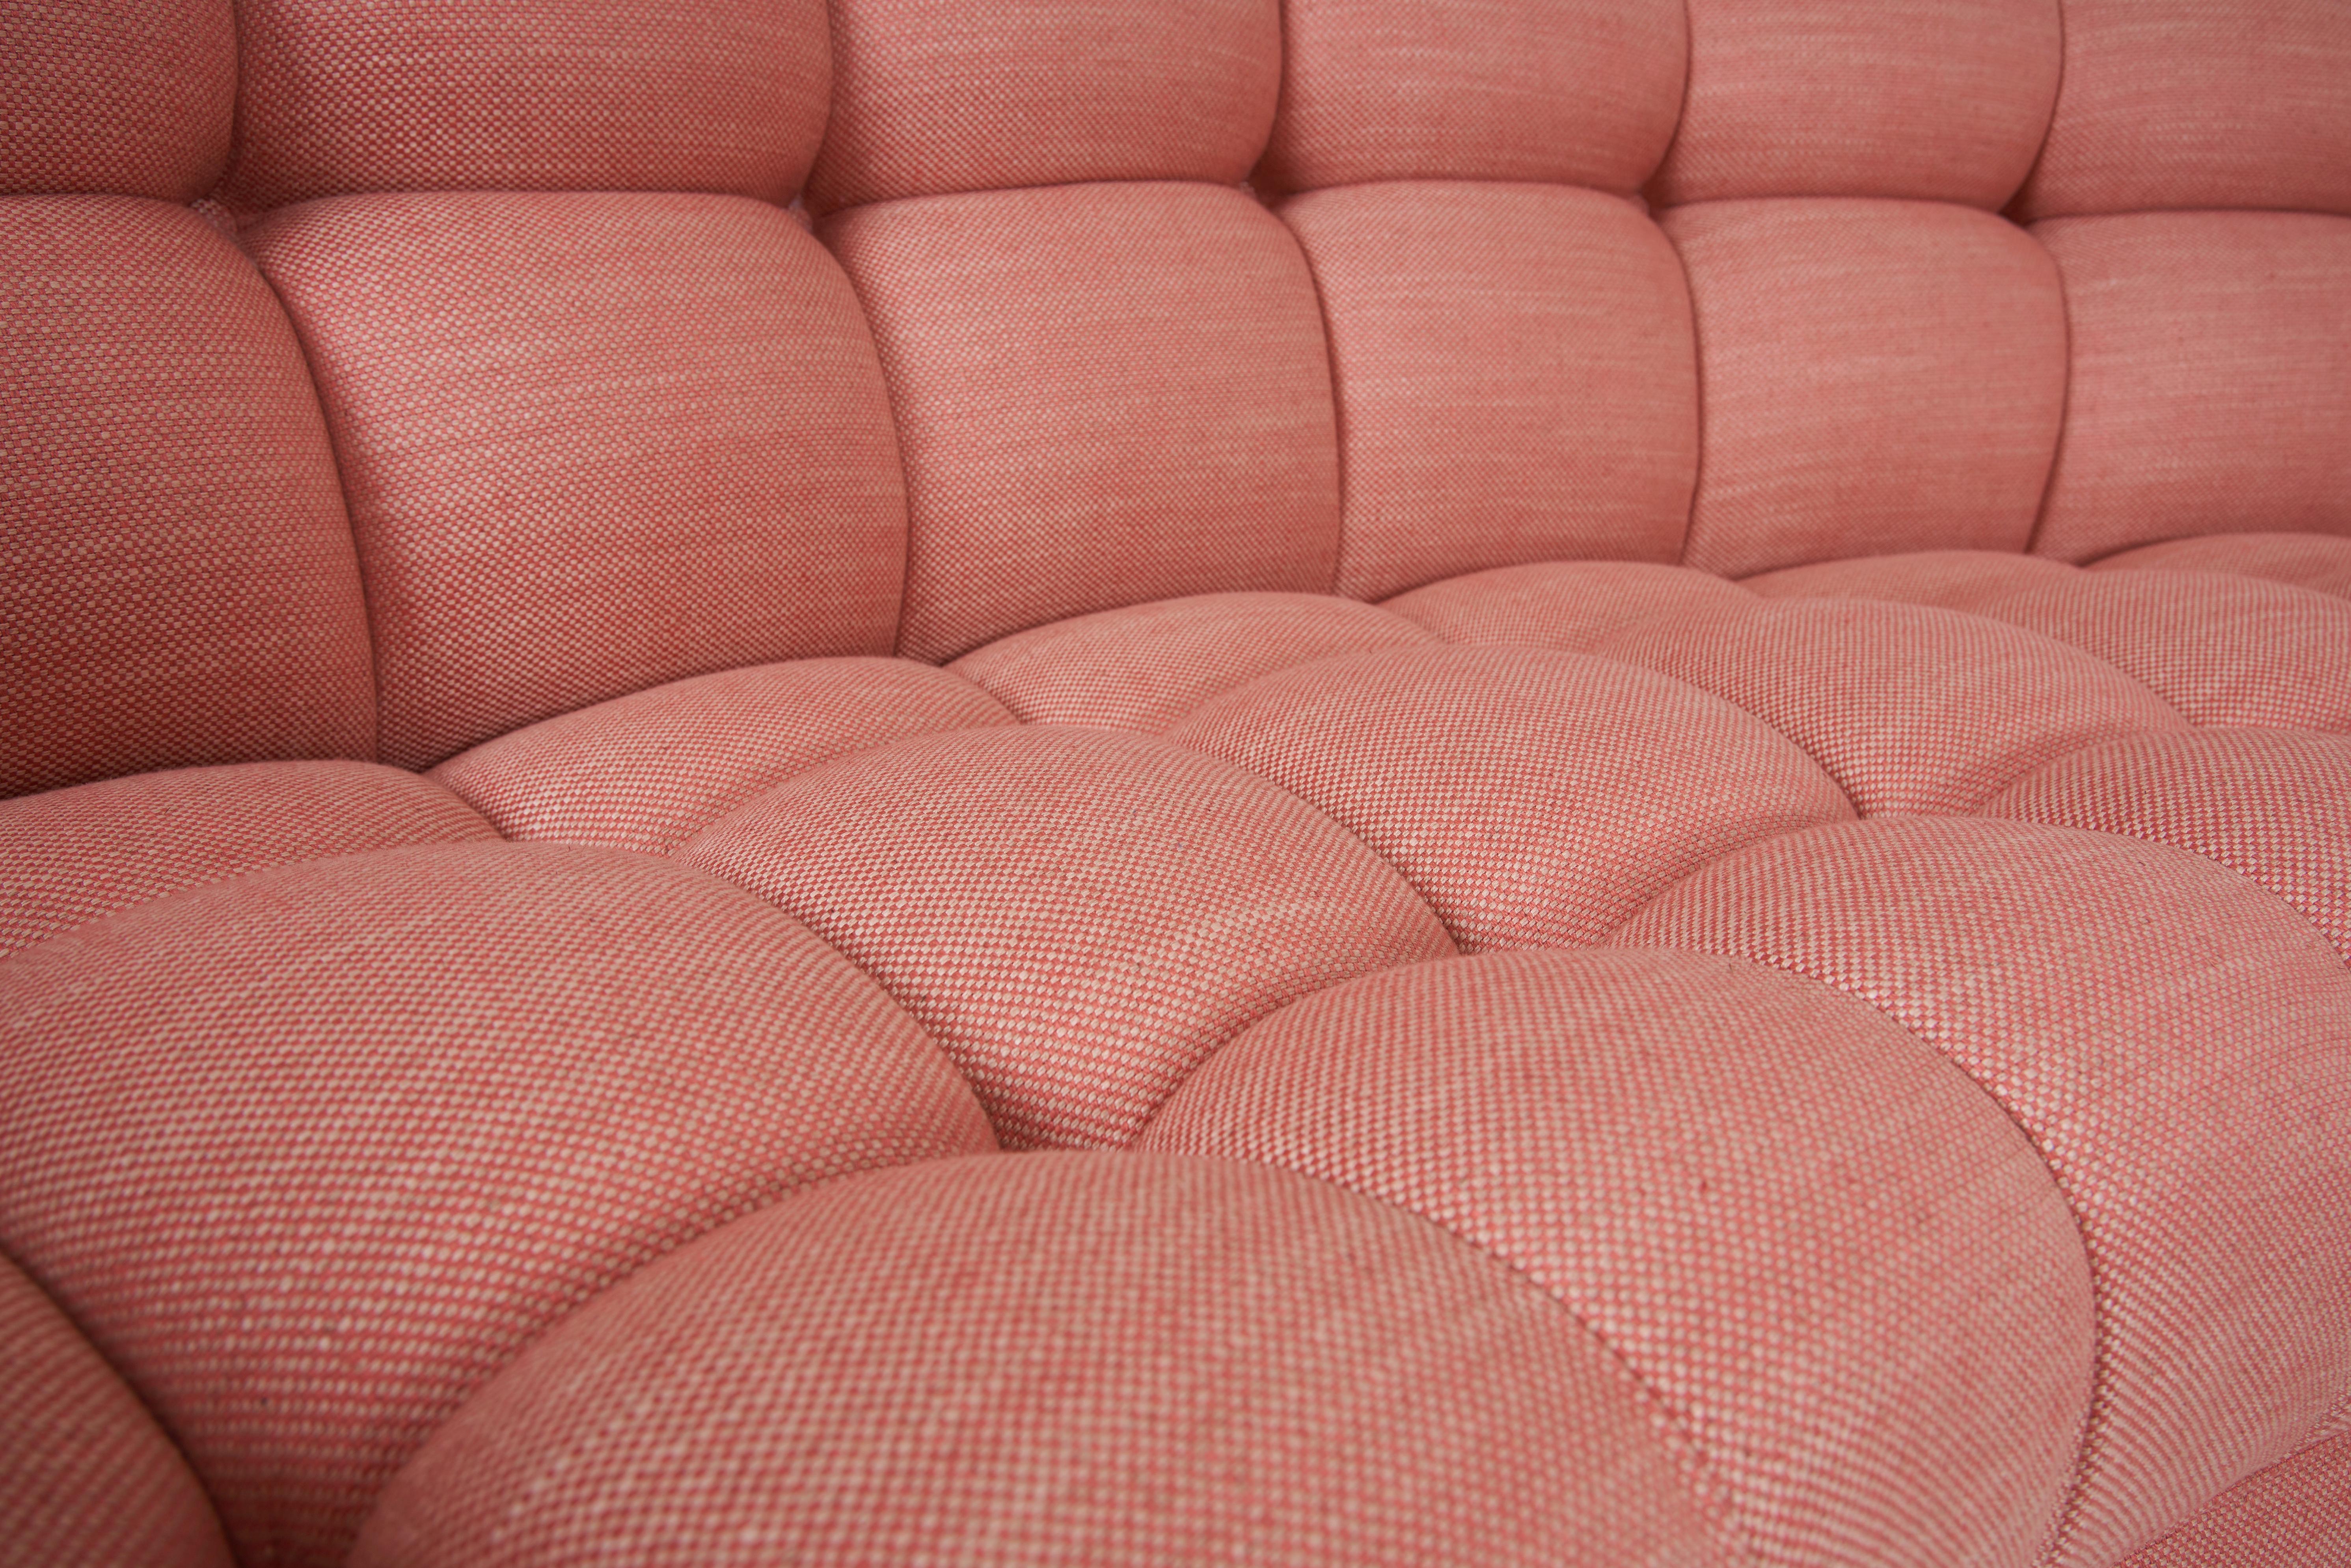 Fabric Biscuit Tufted, Guava Colored, Curved Three Piece Sectional by William Haines